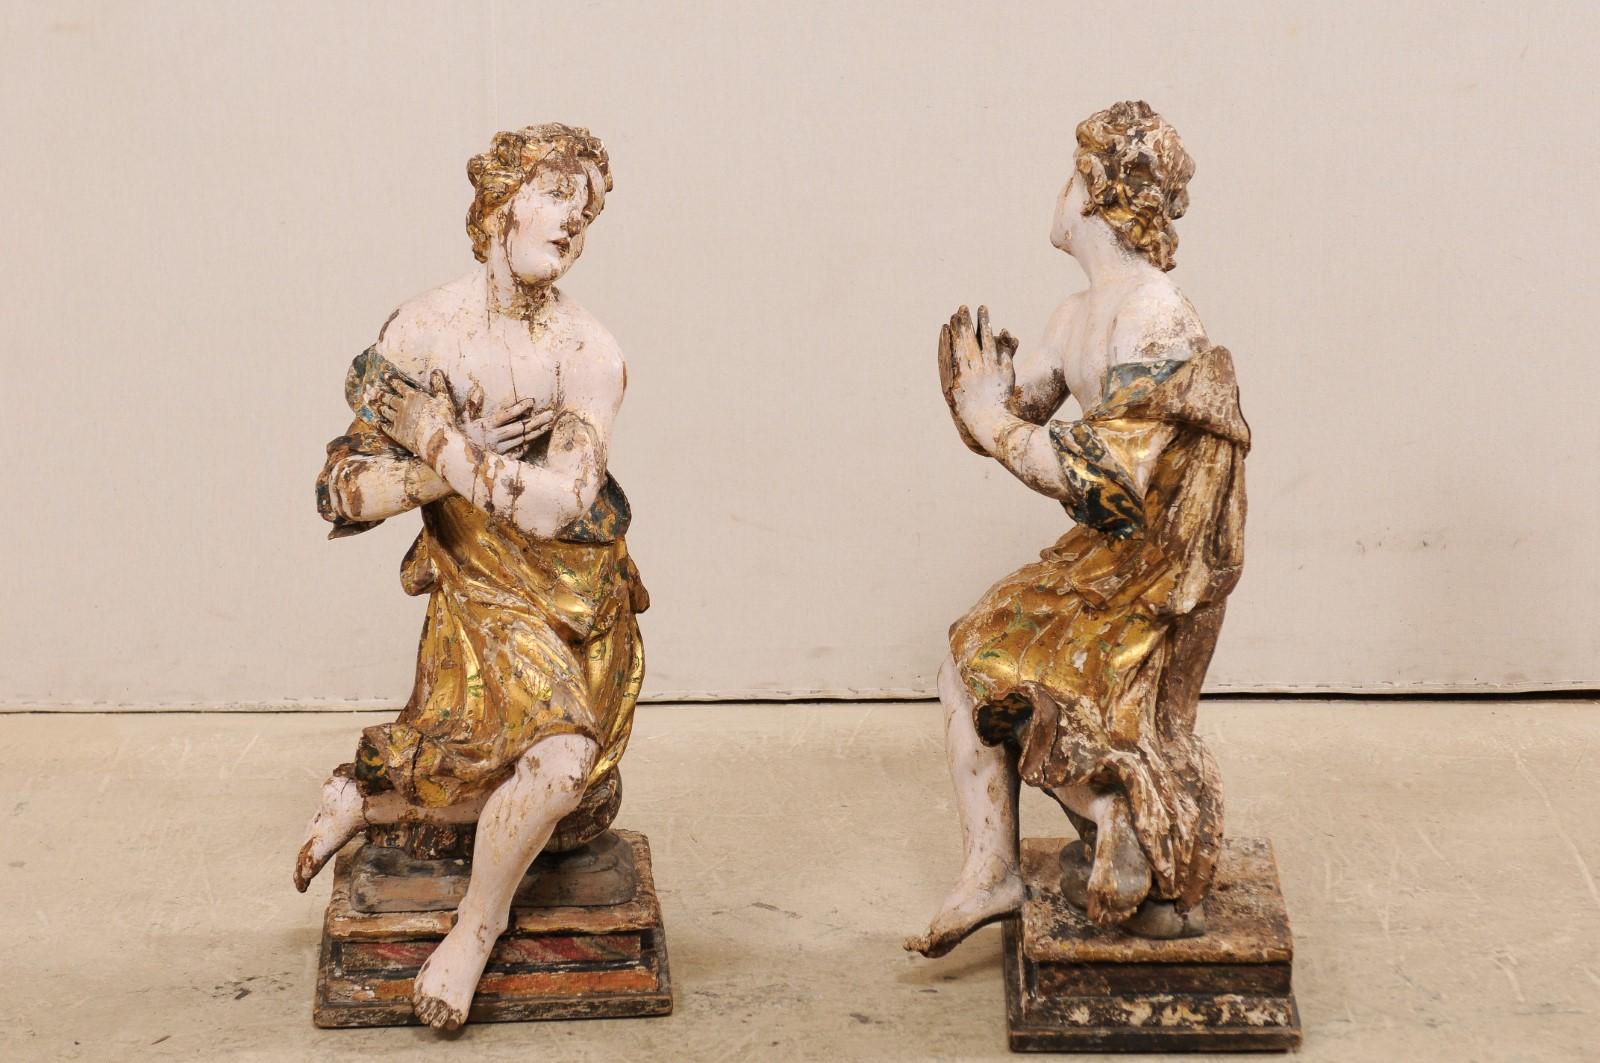 Hand-Carved Exquisite Pair of 18th Century Italian Angelic Wood Carved Male Figures